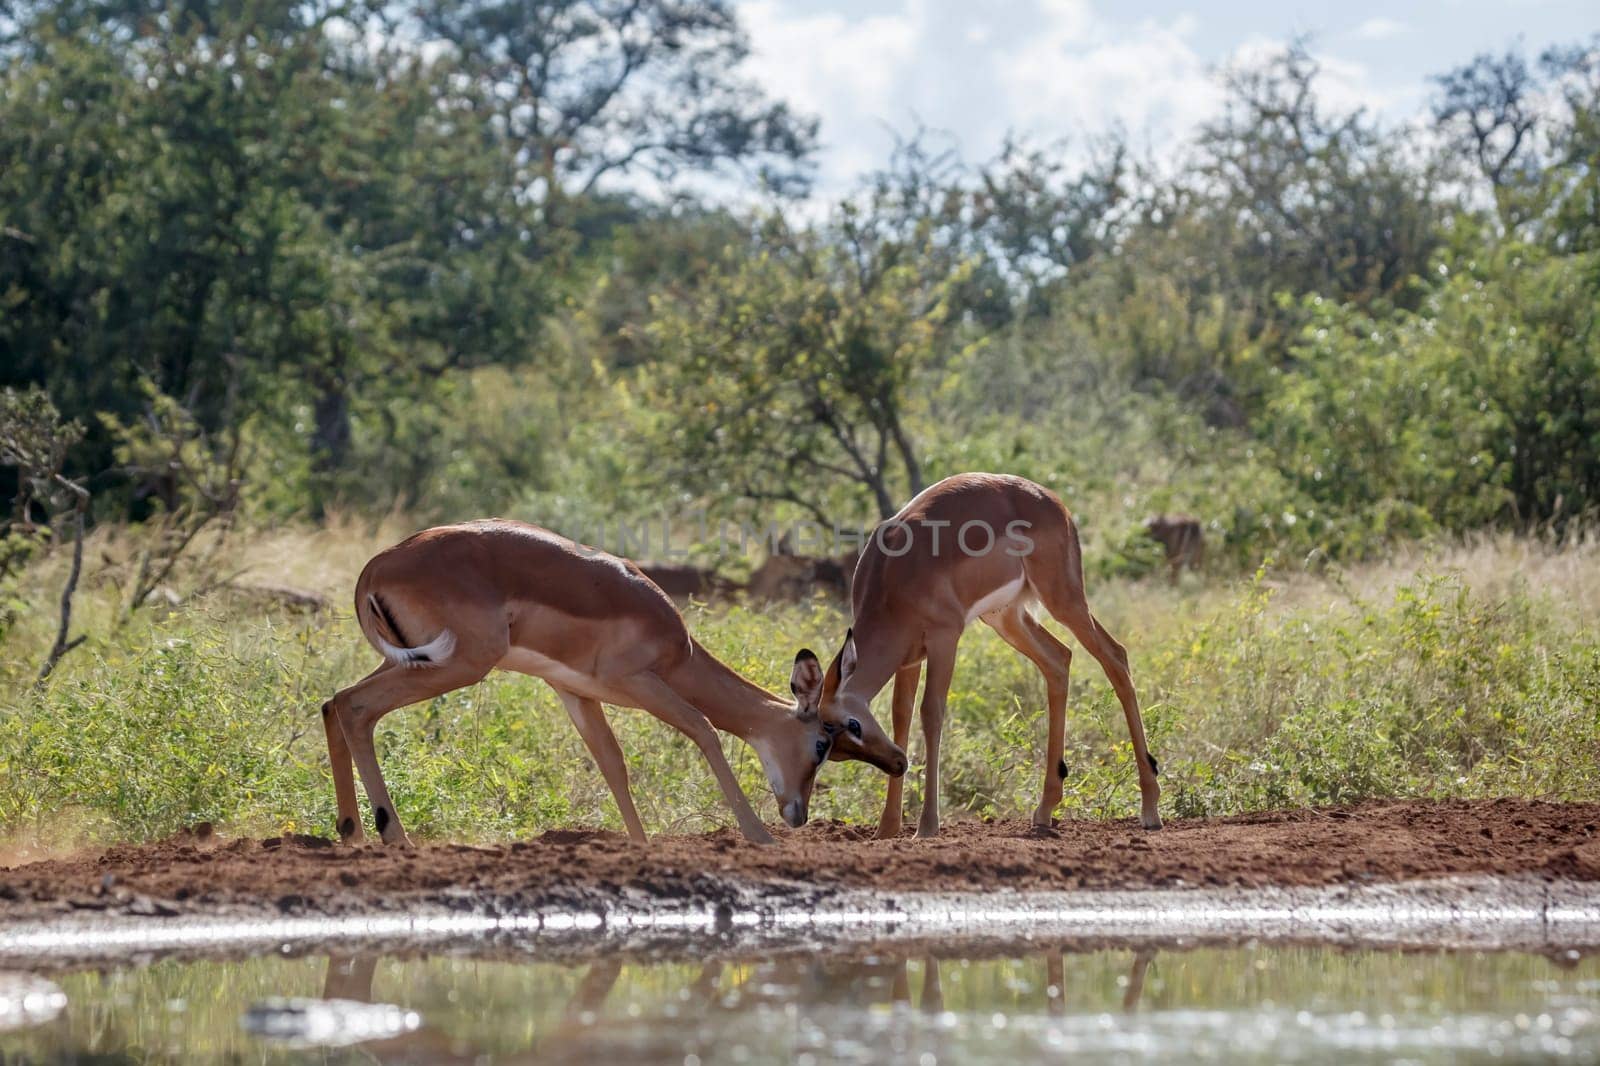 Common Impala in Kruger National park, South Africa by PACOCOMO